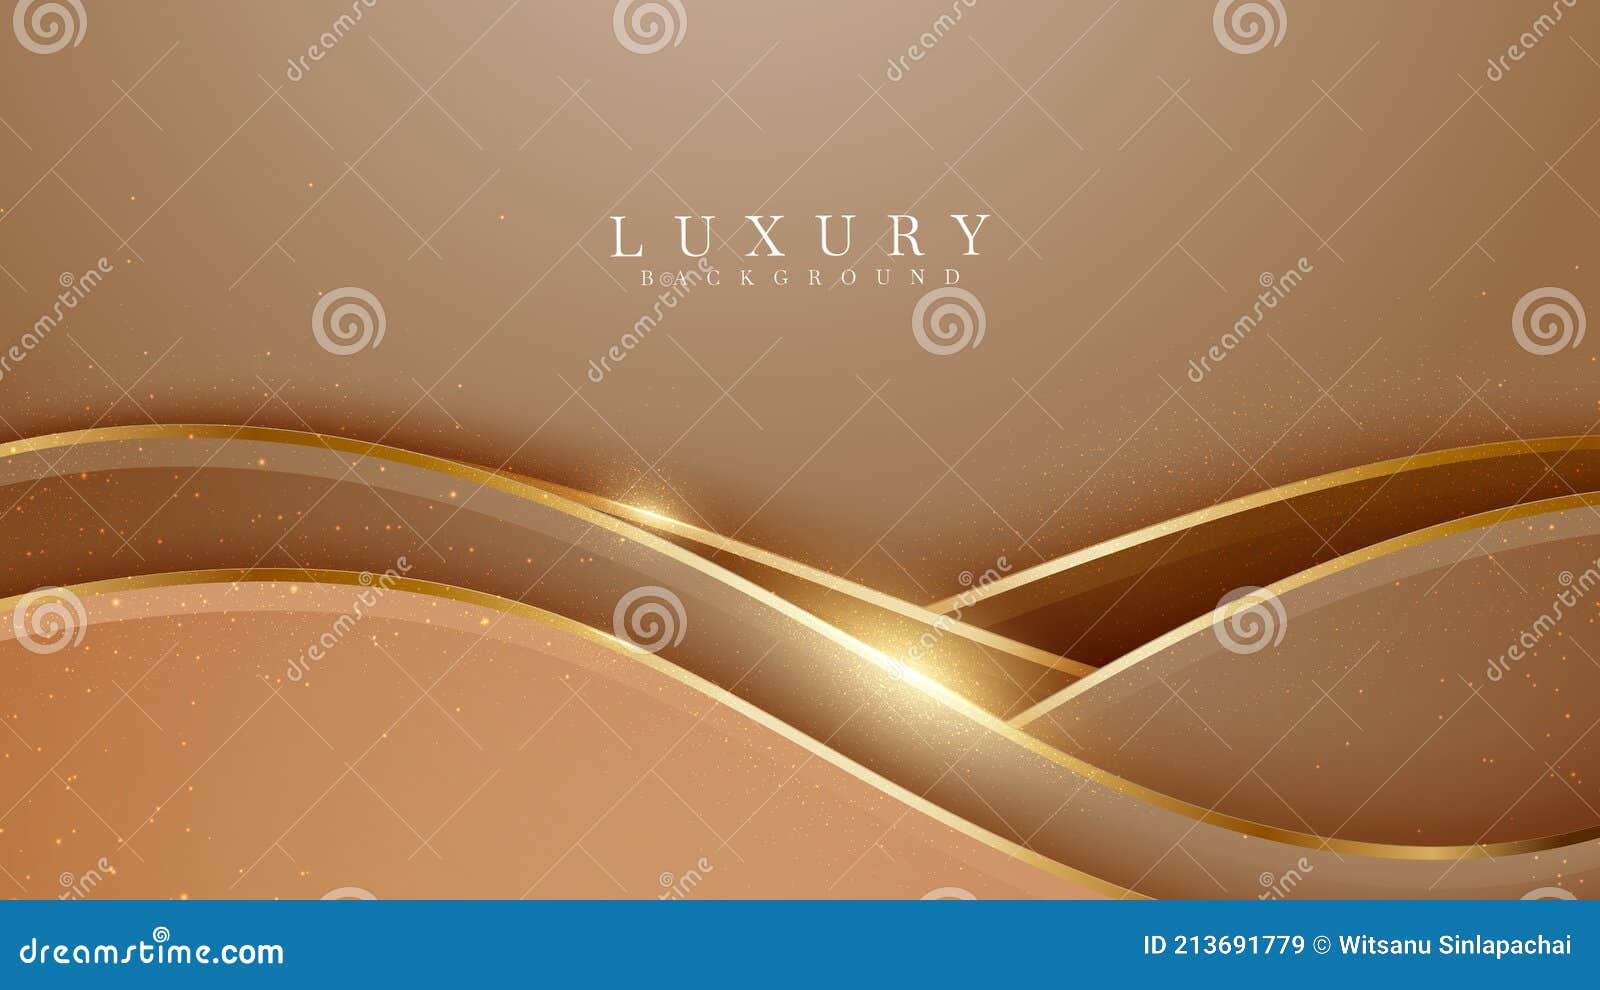 Elegant Brown Shade Background with Line Golden Elements. Realistic Luxury  Paper Cut Style 3d Modern Concept Stock Vector - Illustration of fluid,  curves: 213691779